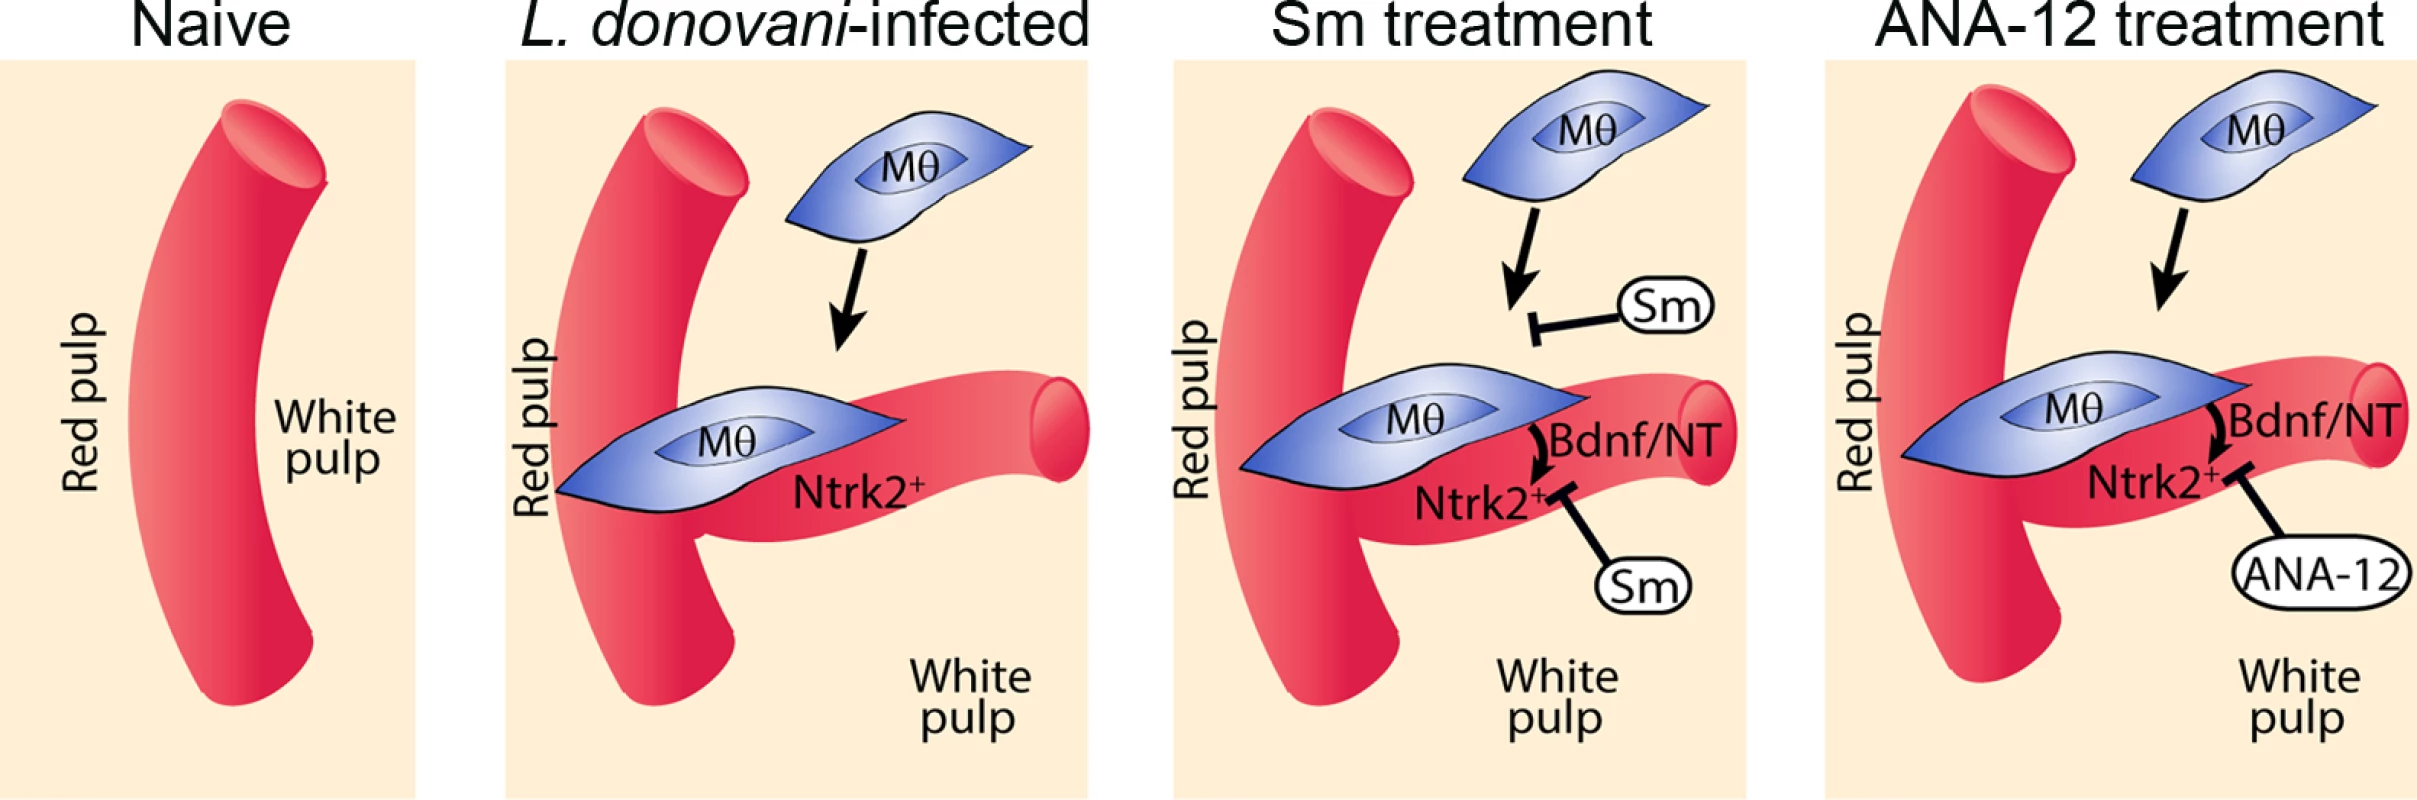 Schematic diagram of the effects of treatment with RTK inhibitors during <i>L.donovani</i> infection.